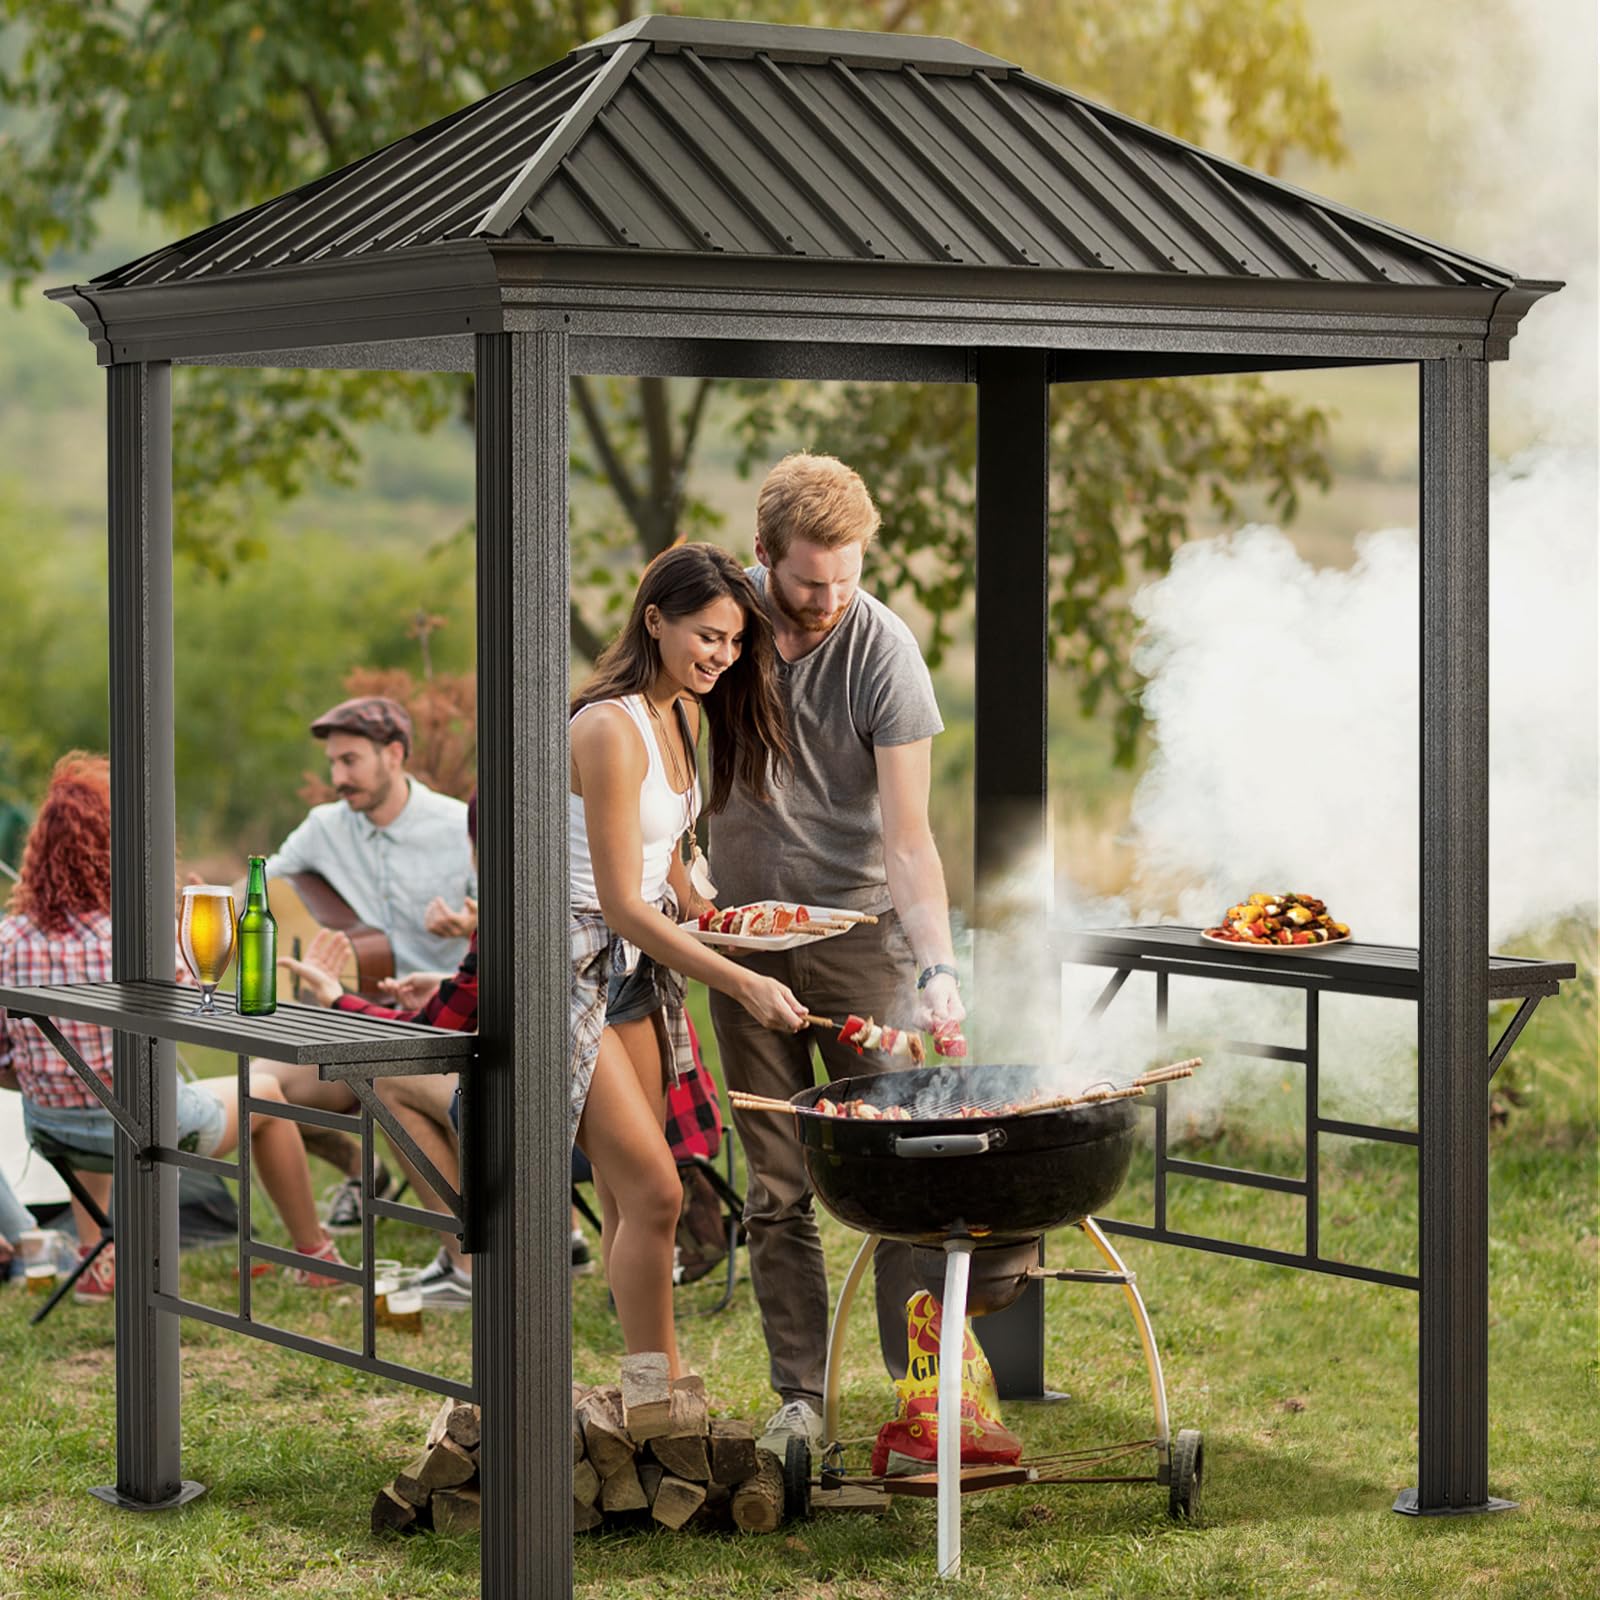 ABCCANOPY 6x8 Grill Hardtop Gazebo - Outdoor Metal Gazebo with Galvanized Steel Roof, Permanent Aluminum BBQ Canopy with Shelves for Patio, Lawn, Garden (Single Roof, Dark Brown)